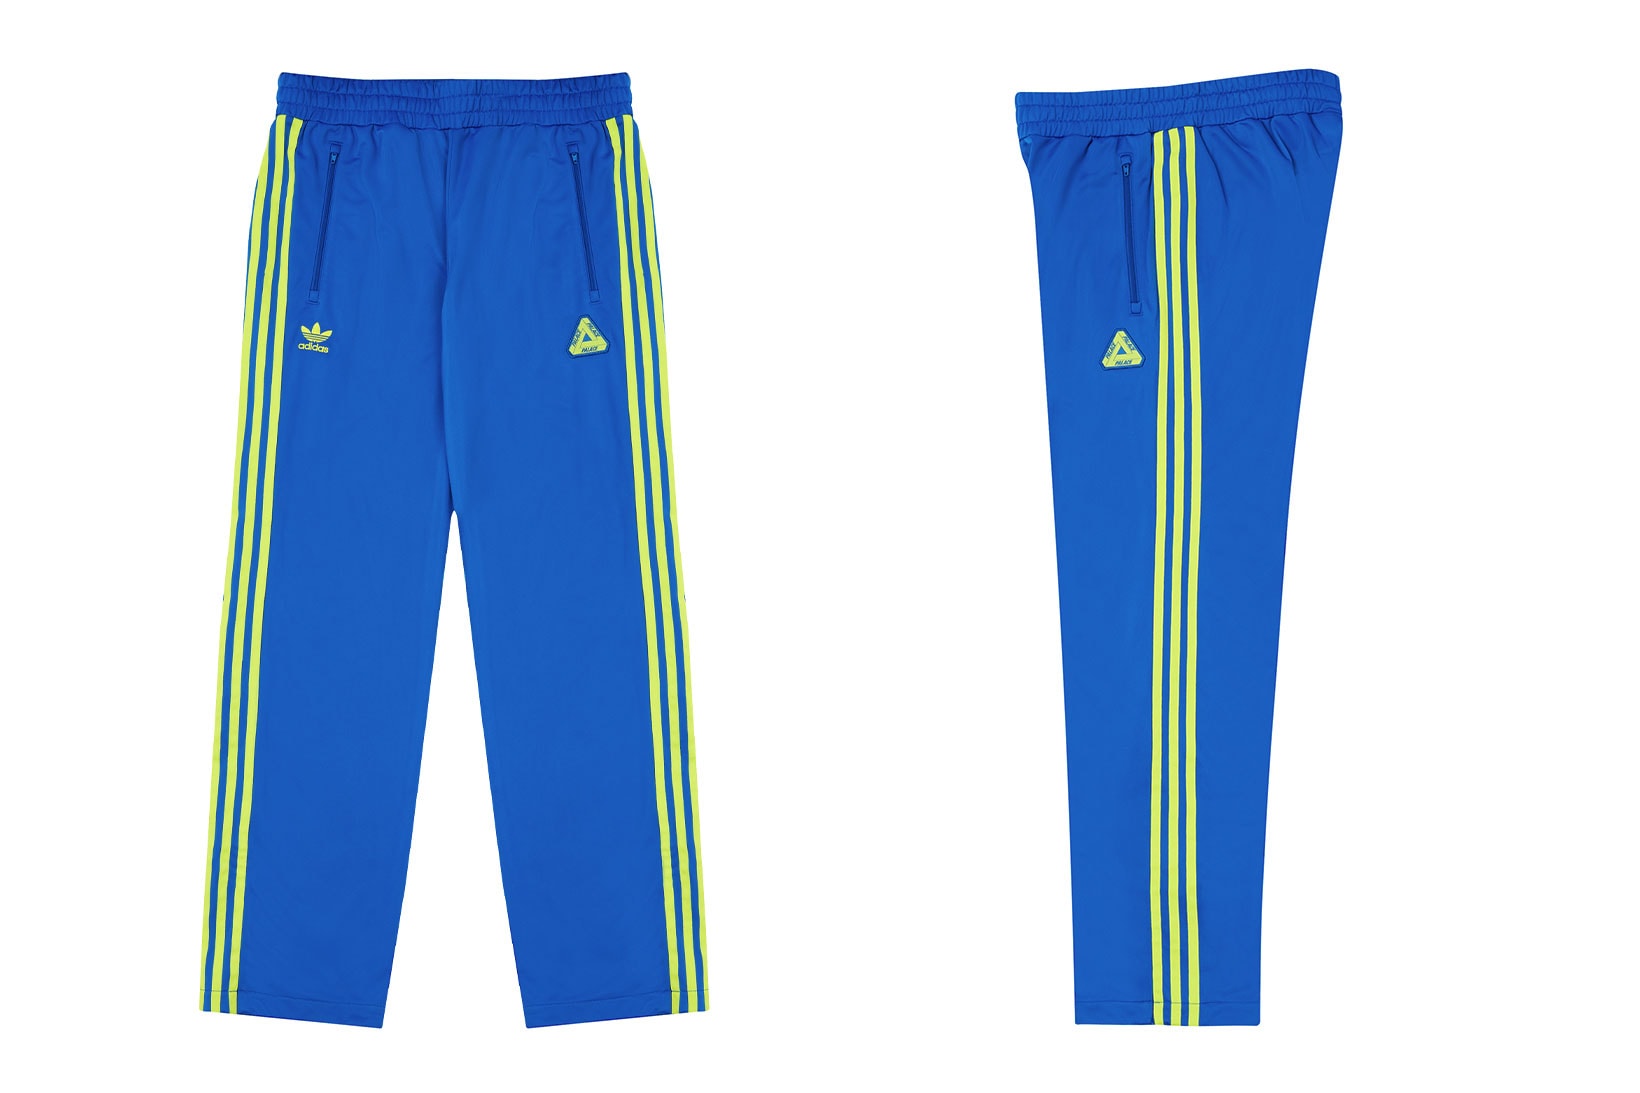 palace skateboards holiday drop 5 adidas originals tracksuits blue pants release when to buy